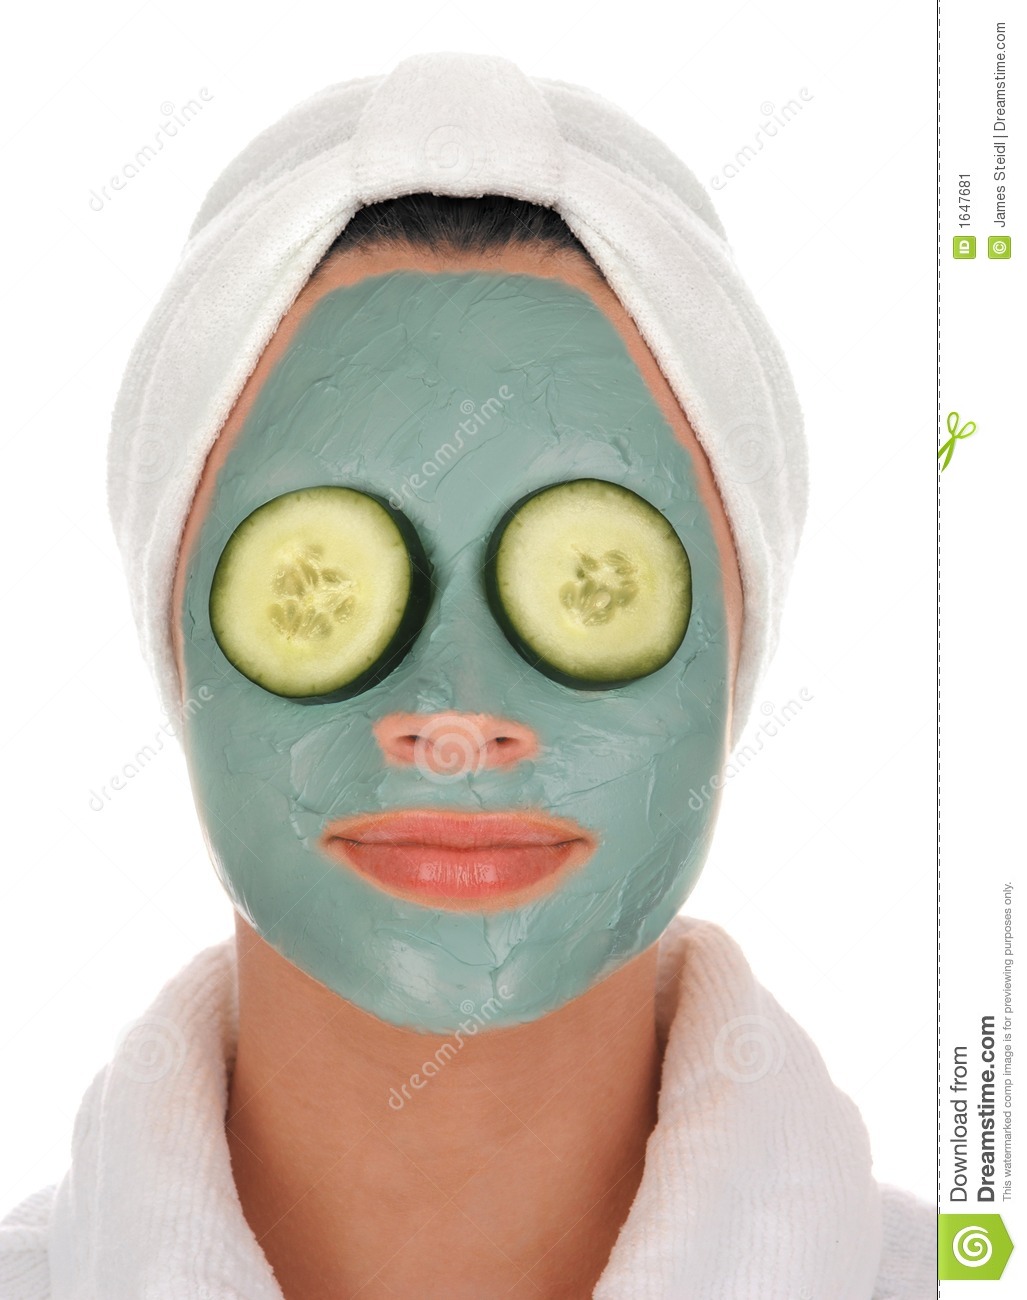 Mud Mask Facial Treatment And Cucumbers Over Eyes On White Background